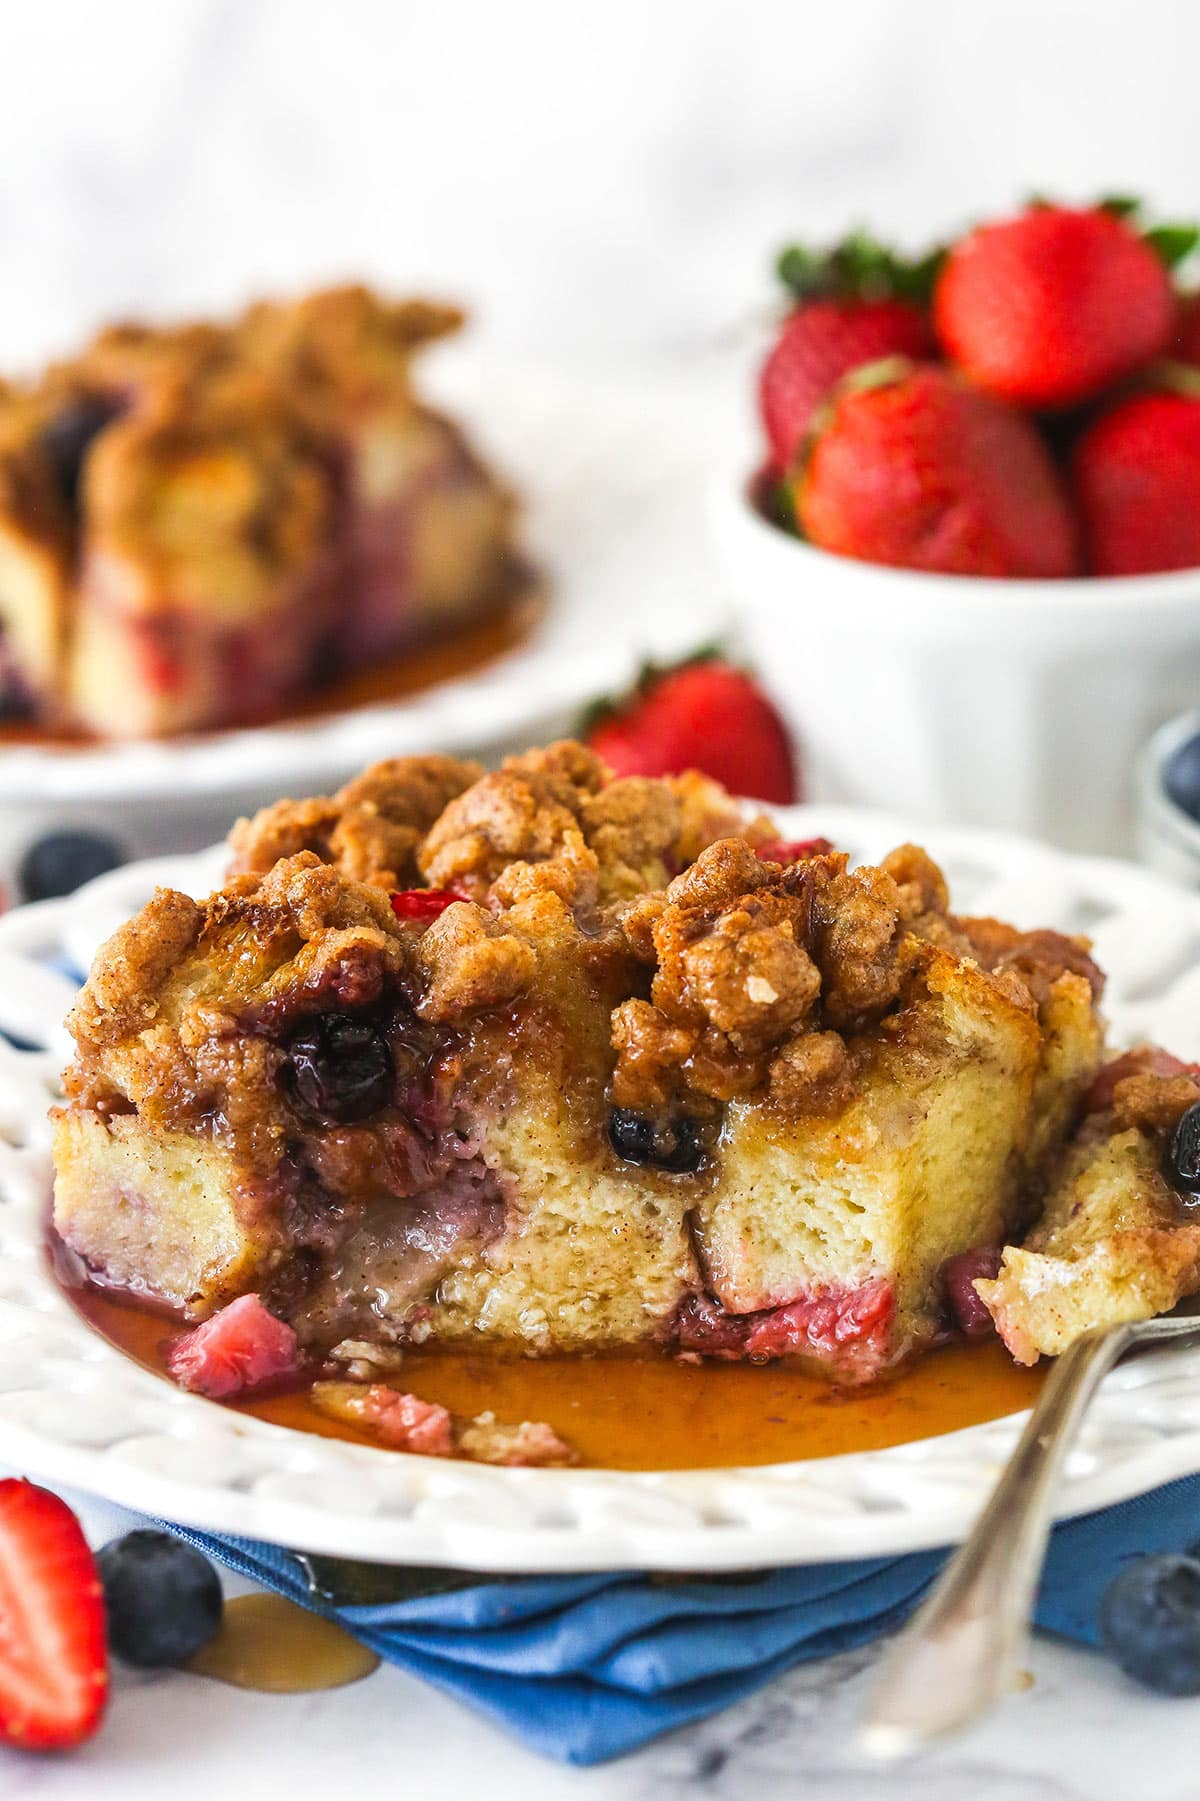 A slice of berry French toast casserole on a plate with a couple of bites taken out of it.